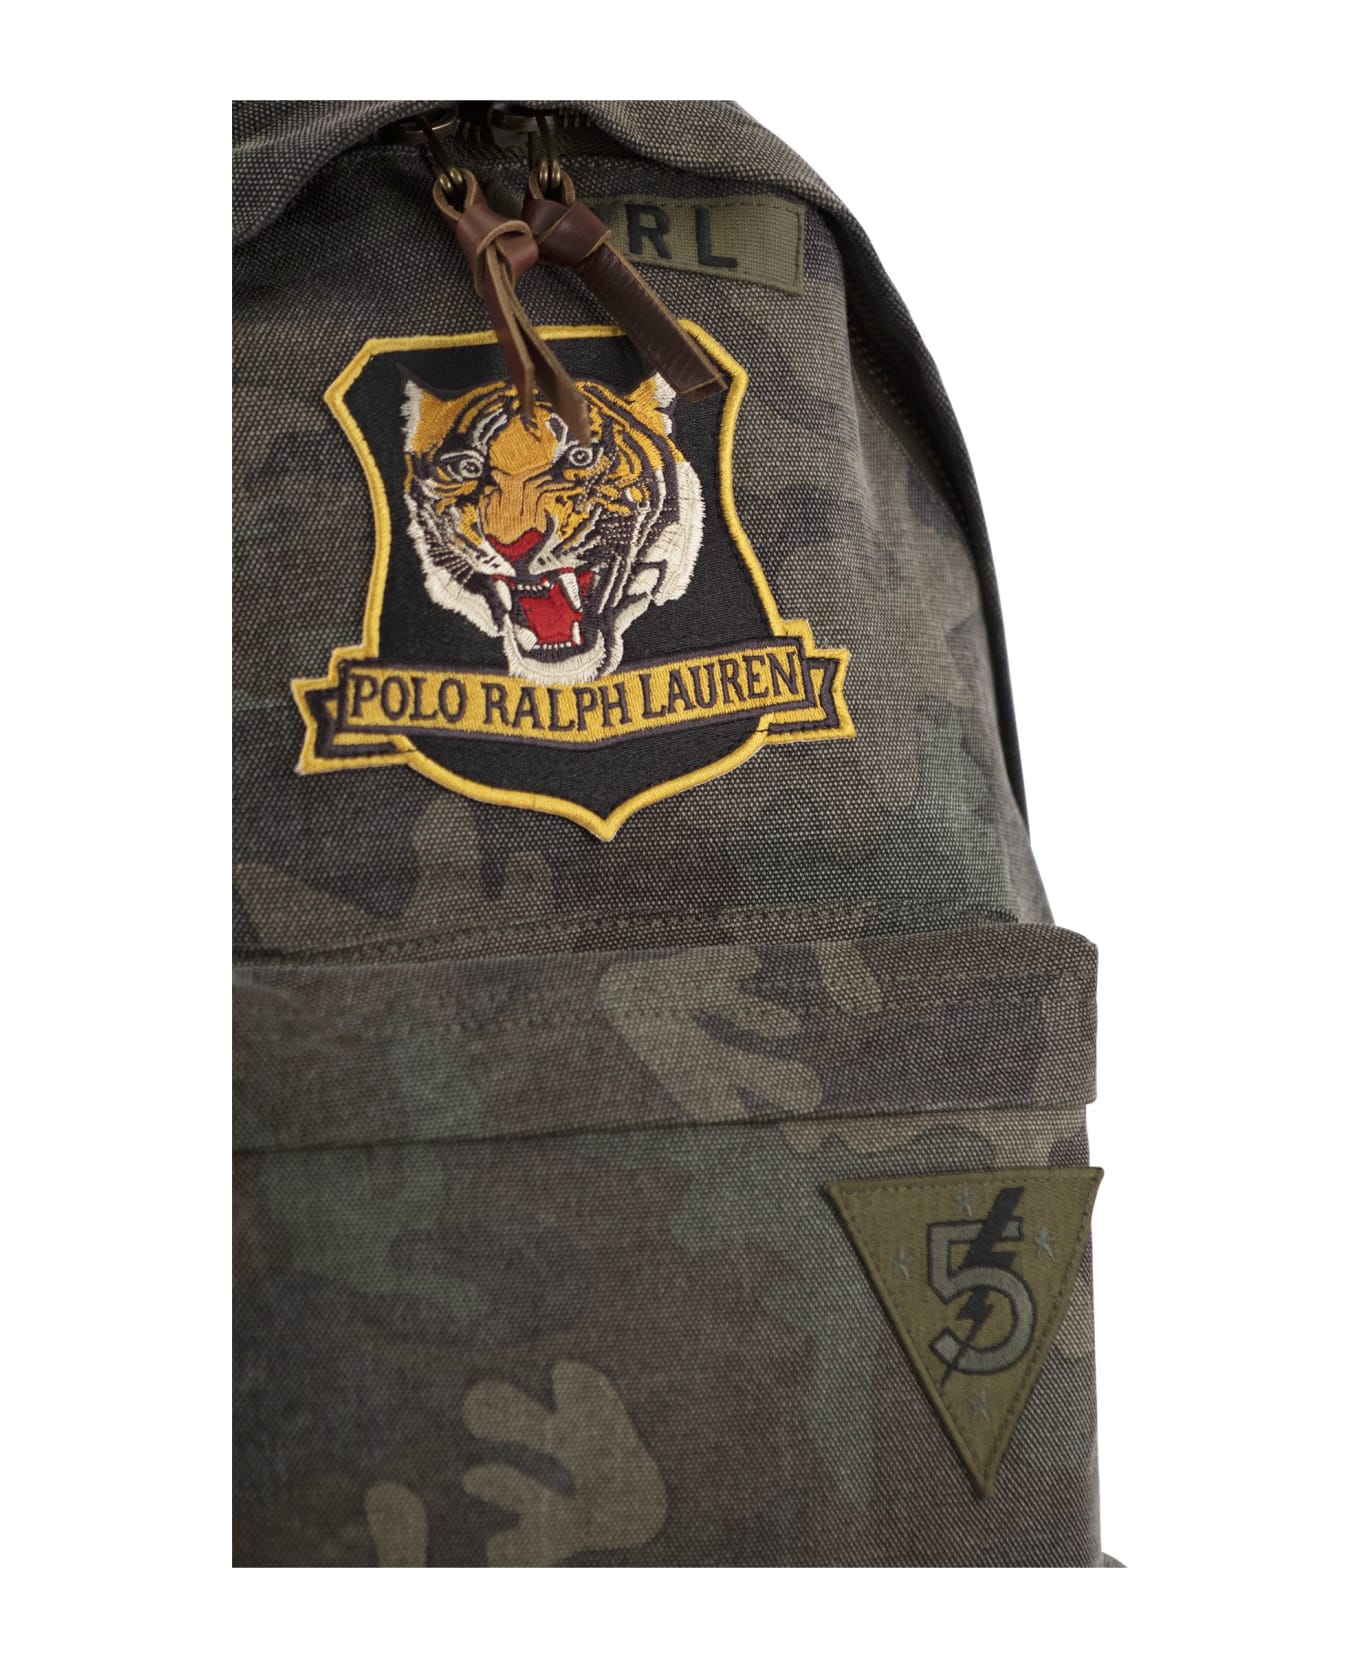 Polo Ralph Lauren Camouflage Canvas Backpack With Tiger - Camo バックパック